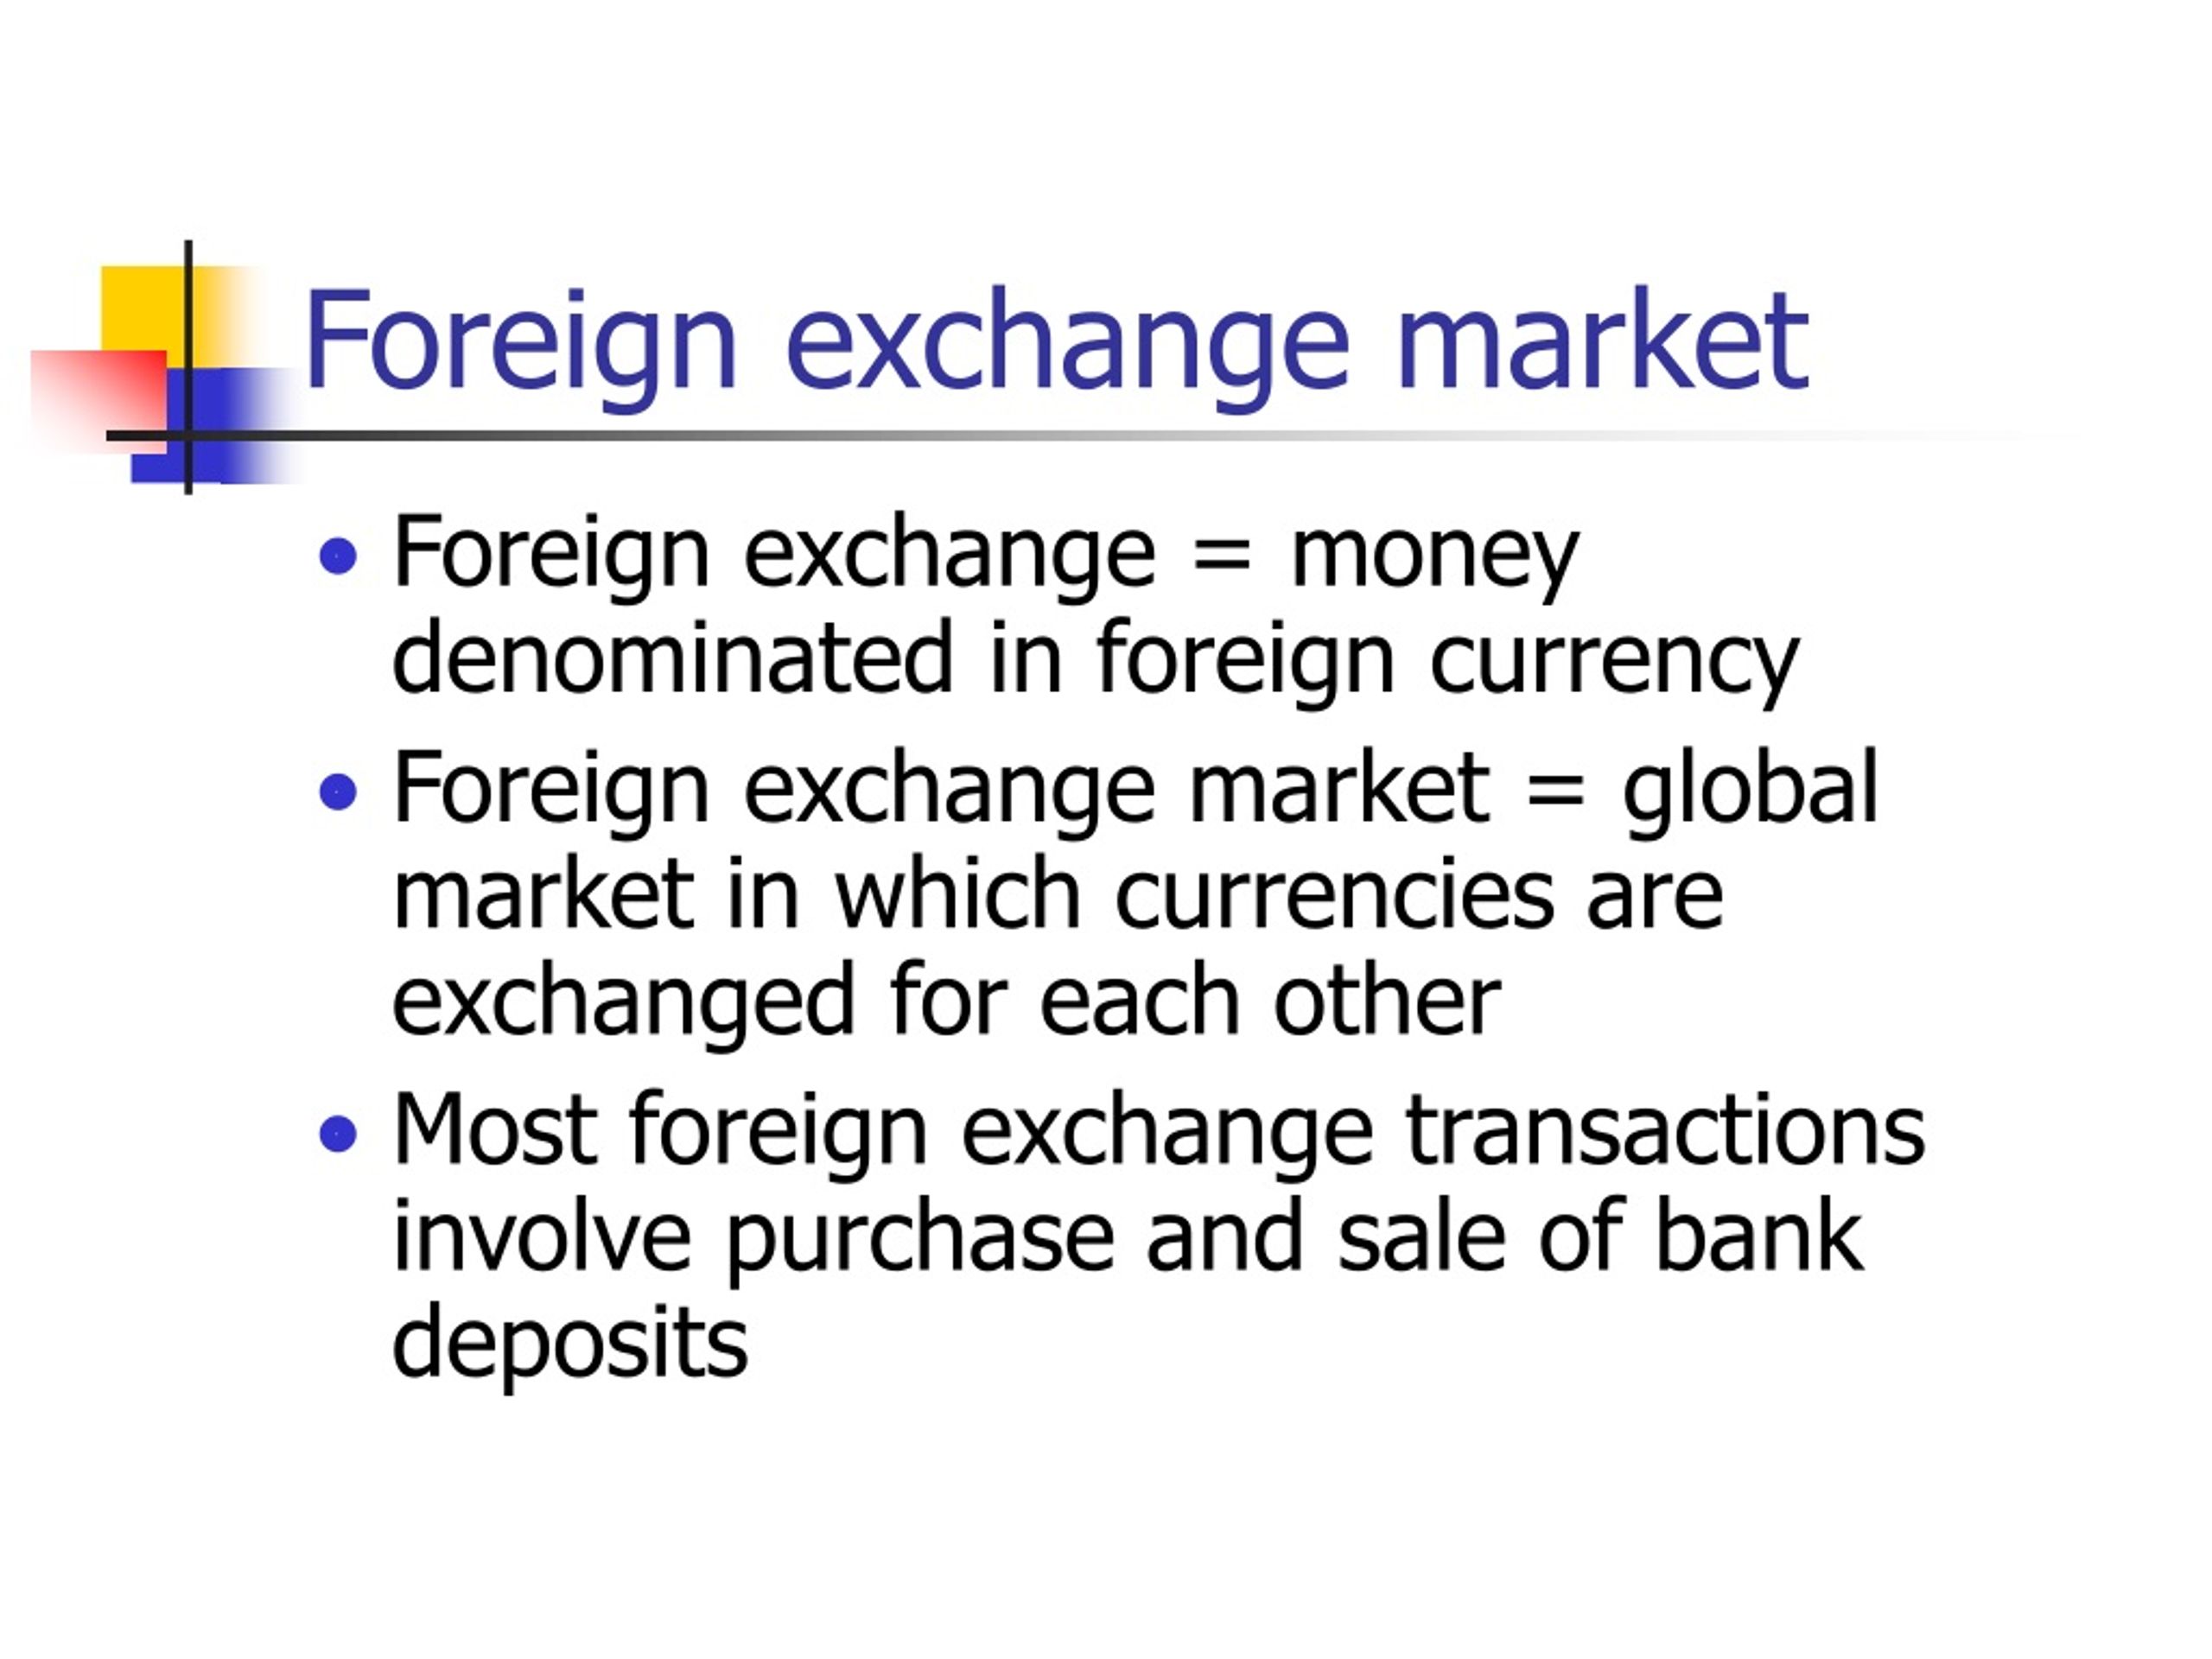 Exchange foreign functions market markets forex financial yard comments